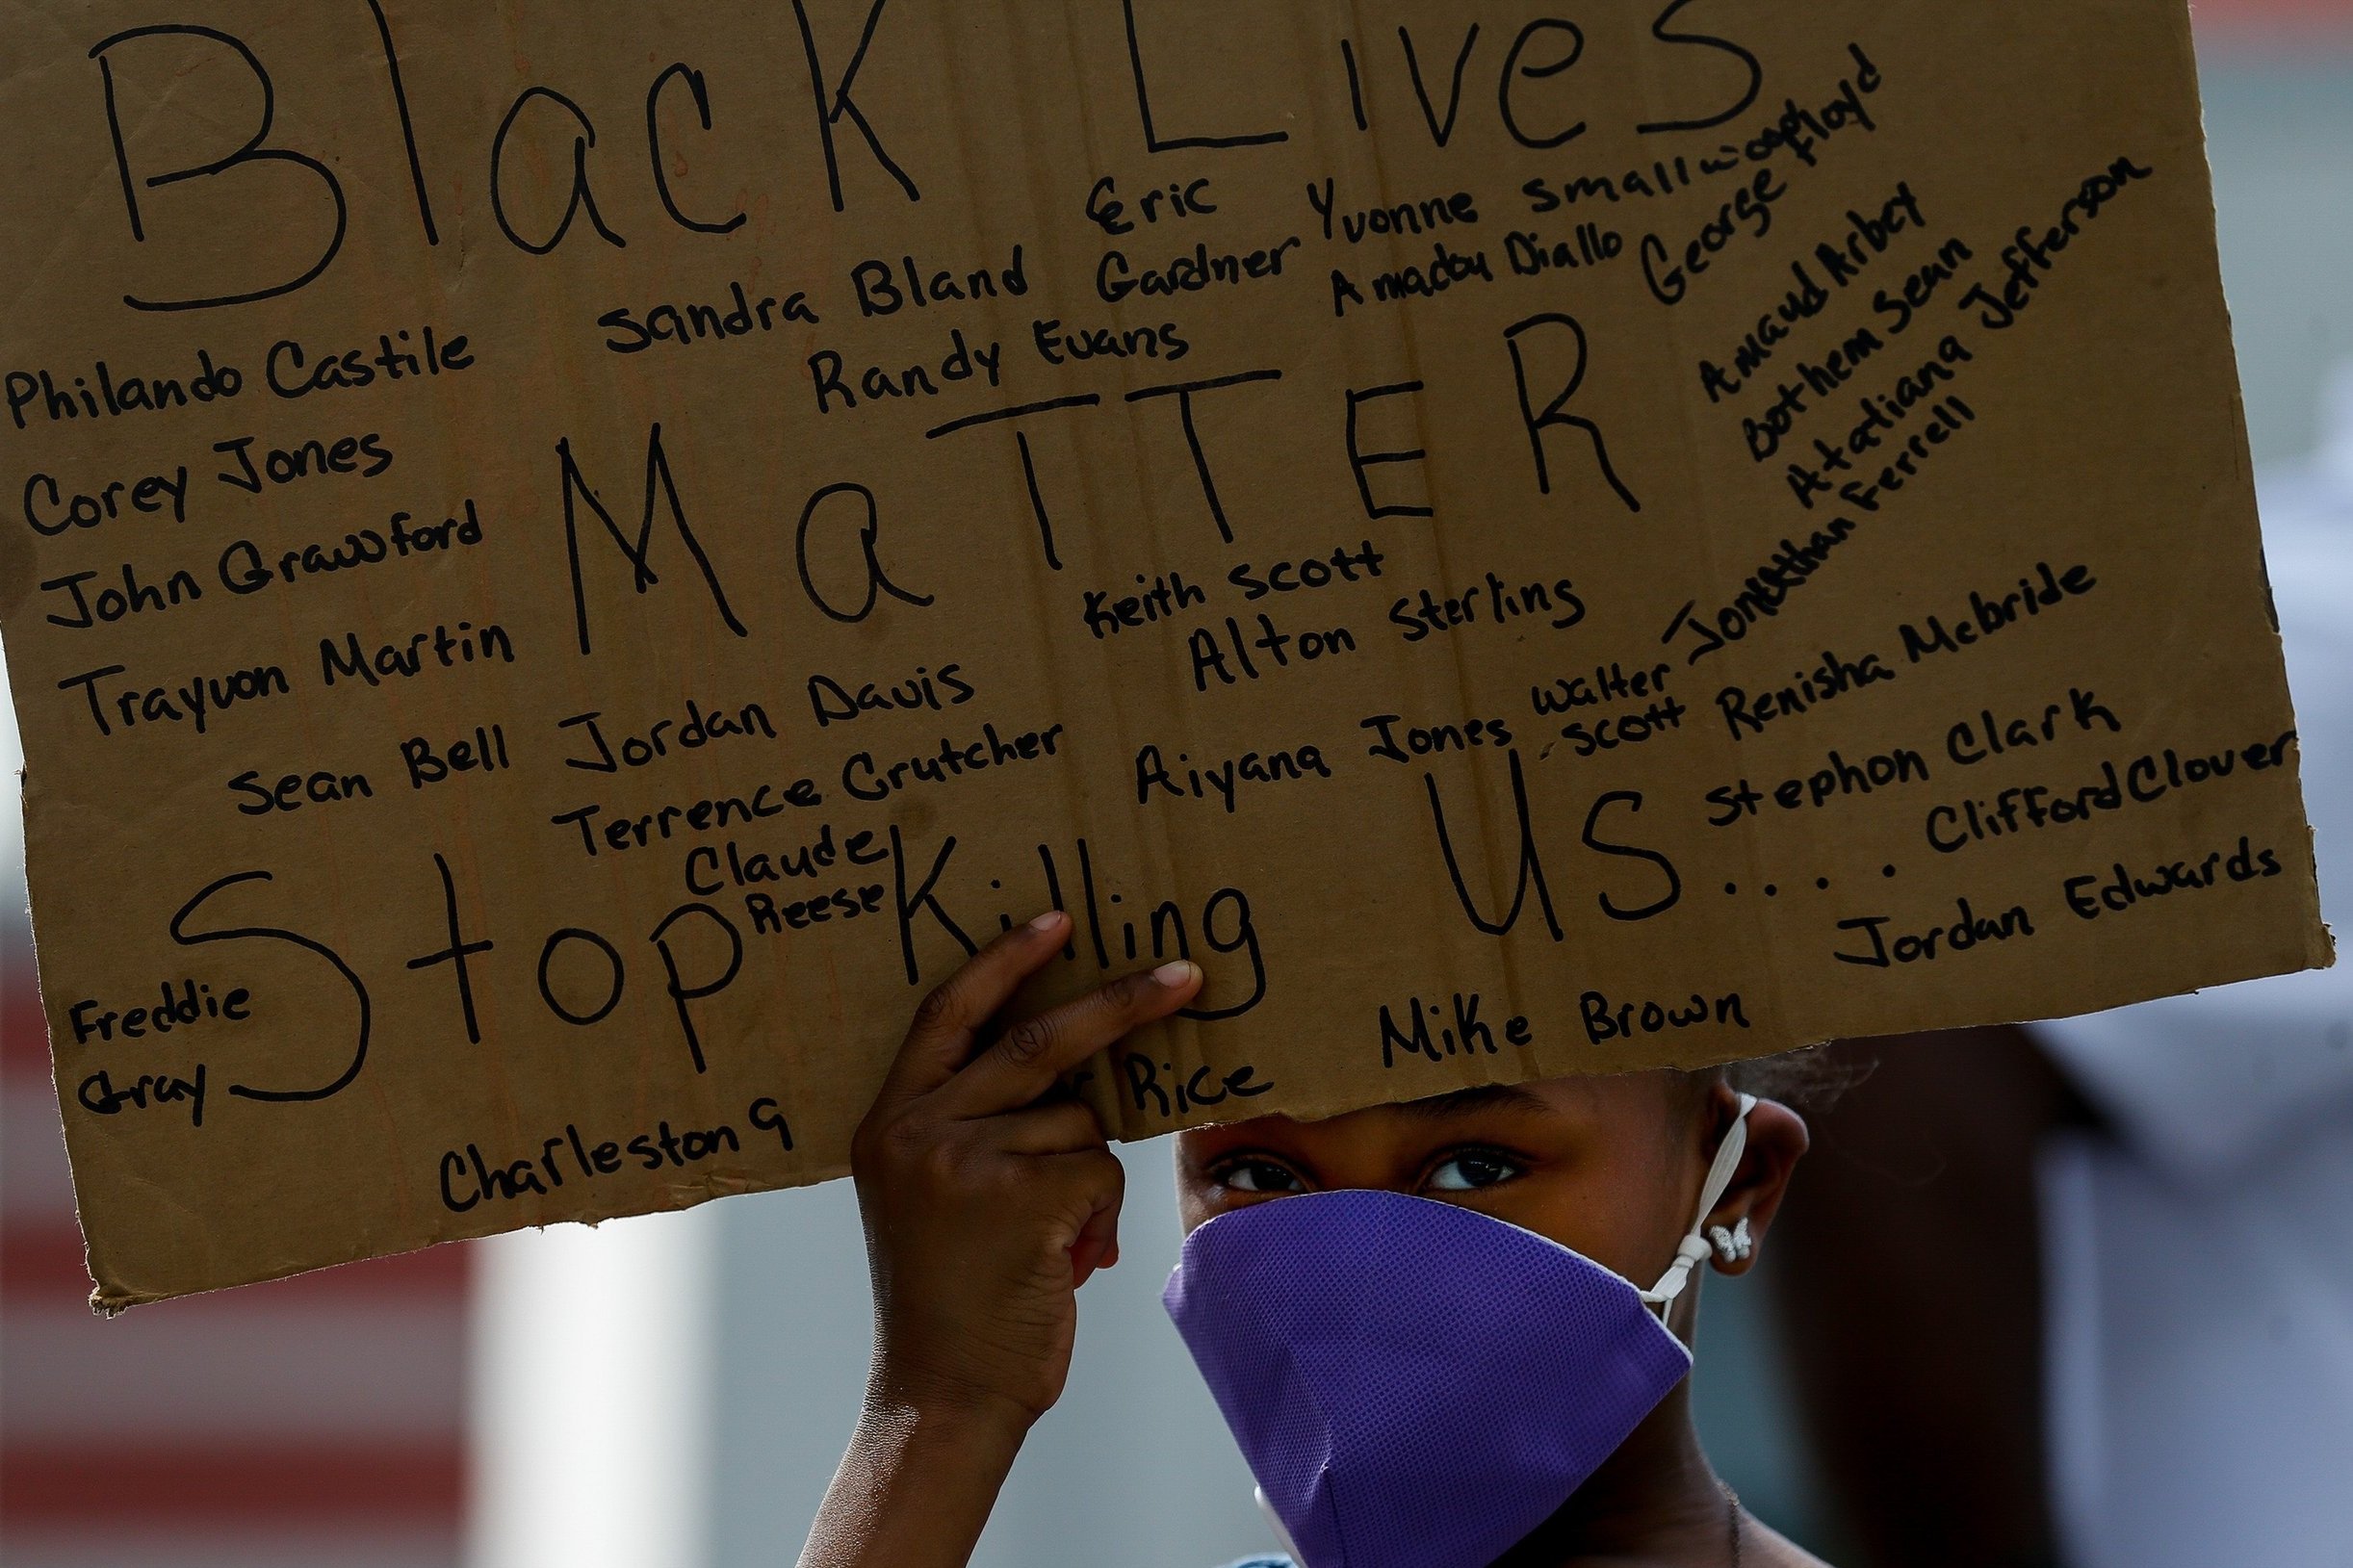  Kailia Allen, 8, holds a sign during a march to protest the death of former Houston resident George Floyd at Emancipation Park on Saturday, May 30, 2020, in Houston, Texas. Floyd died while in custody of the Minneapolis Police Department, after offi